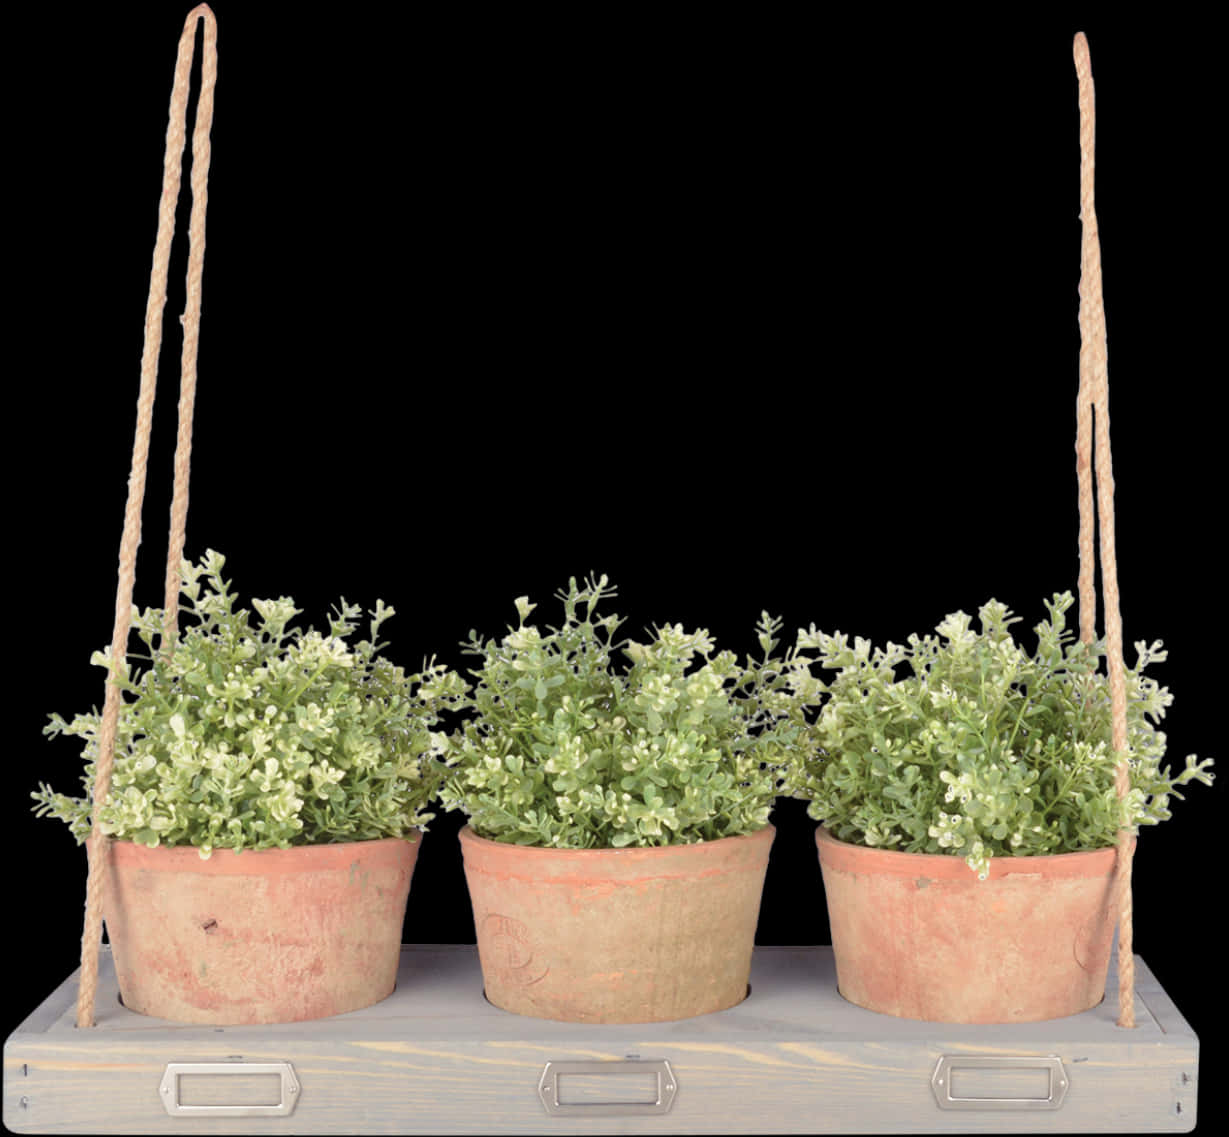 A Group Of Potted Plants On A Wooden Surface